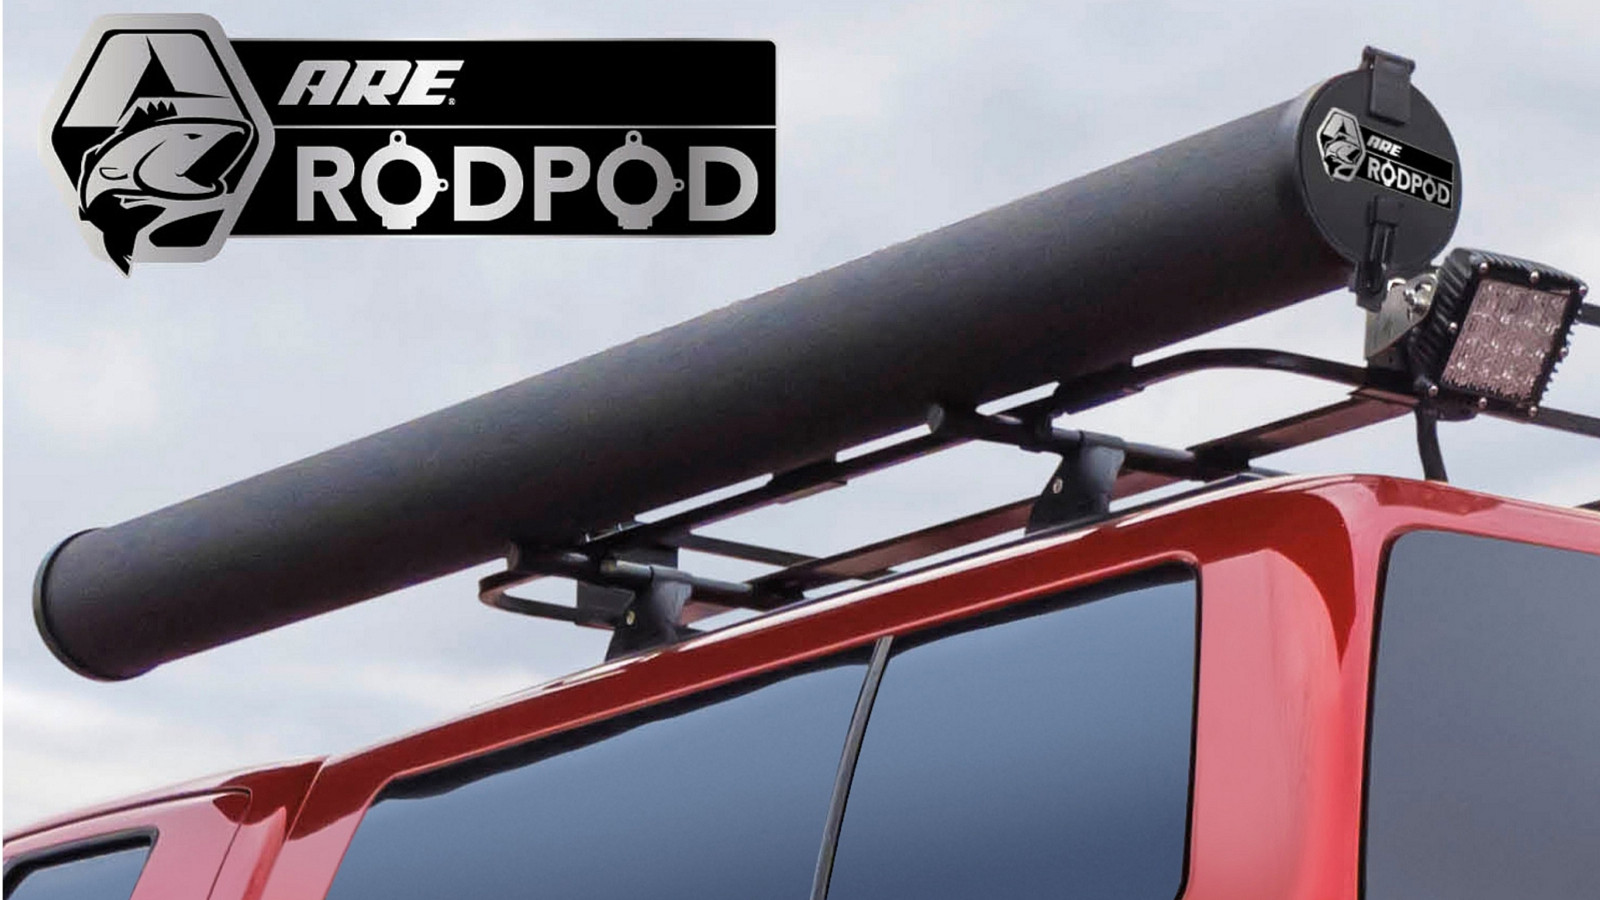 Fly Rod Roof Rack DIY
 What is everyone doing for fishing pole storage